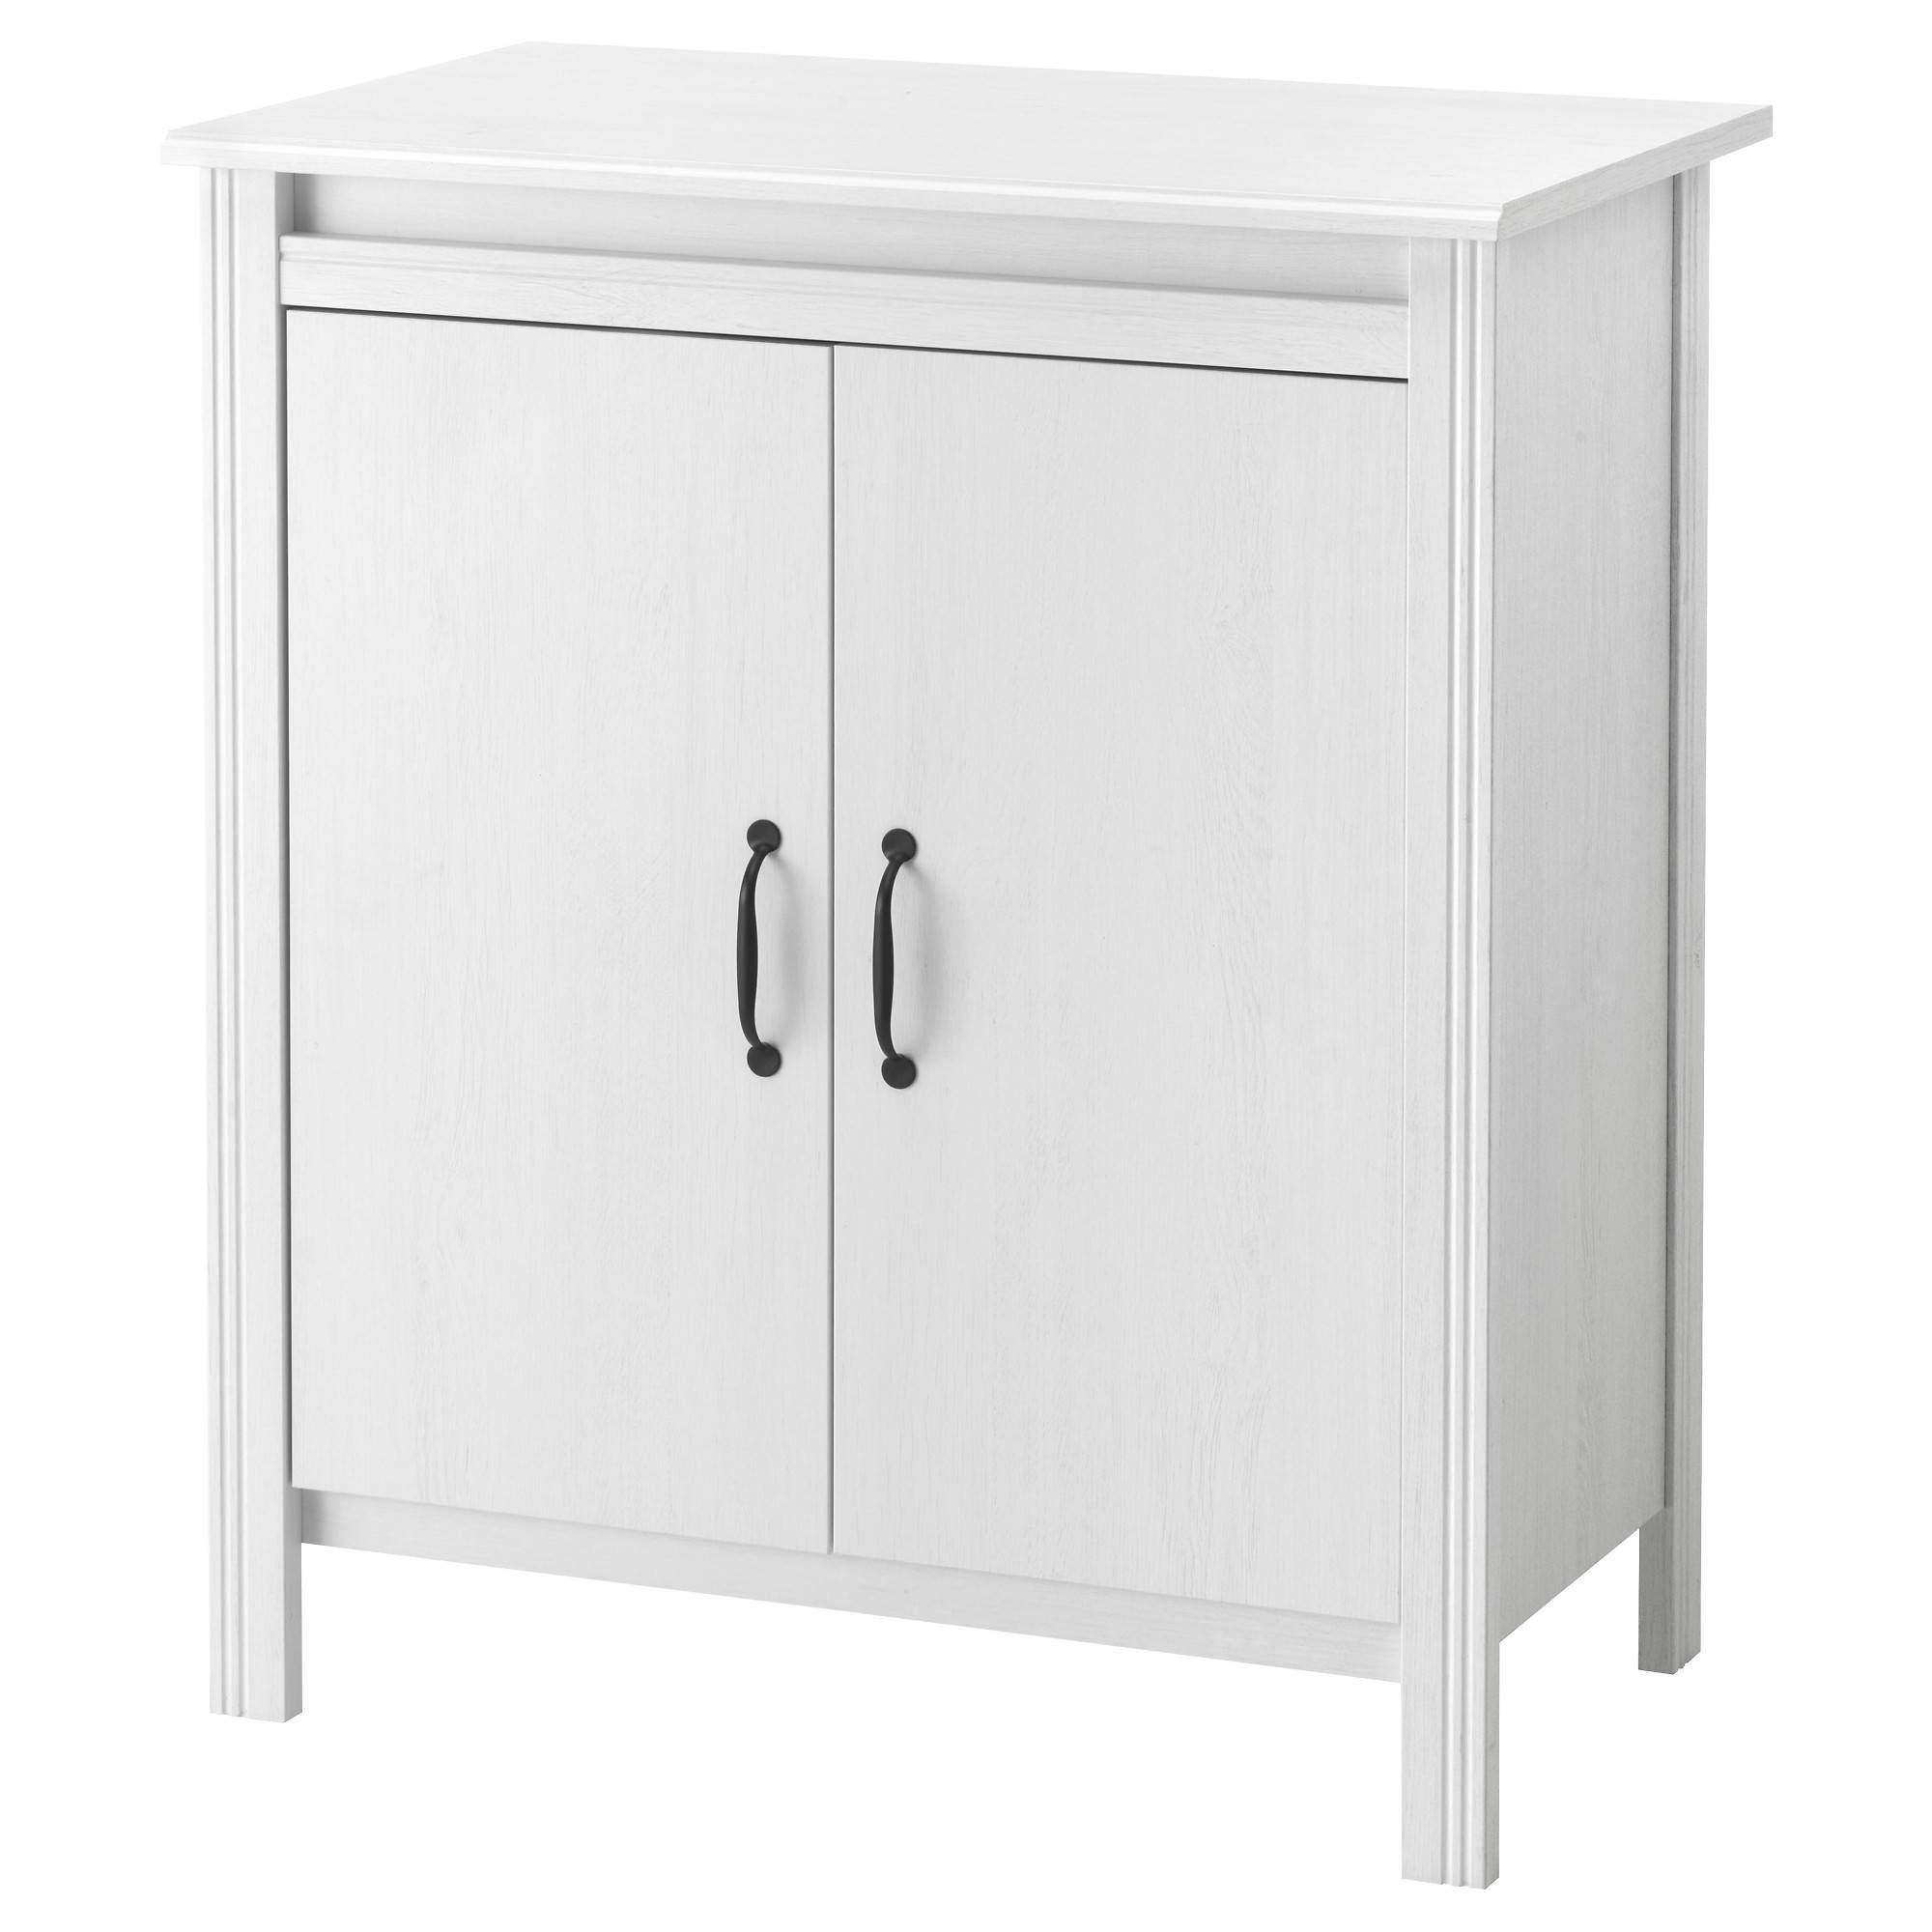 Cabinets & Sideboards – Ikea Inside 12 Inch Deep Sideboards (View 5 of 30)